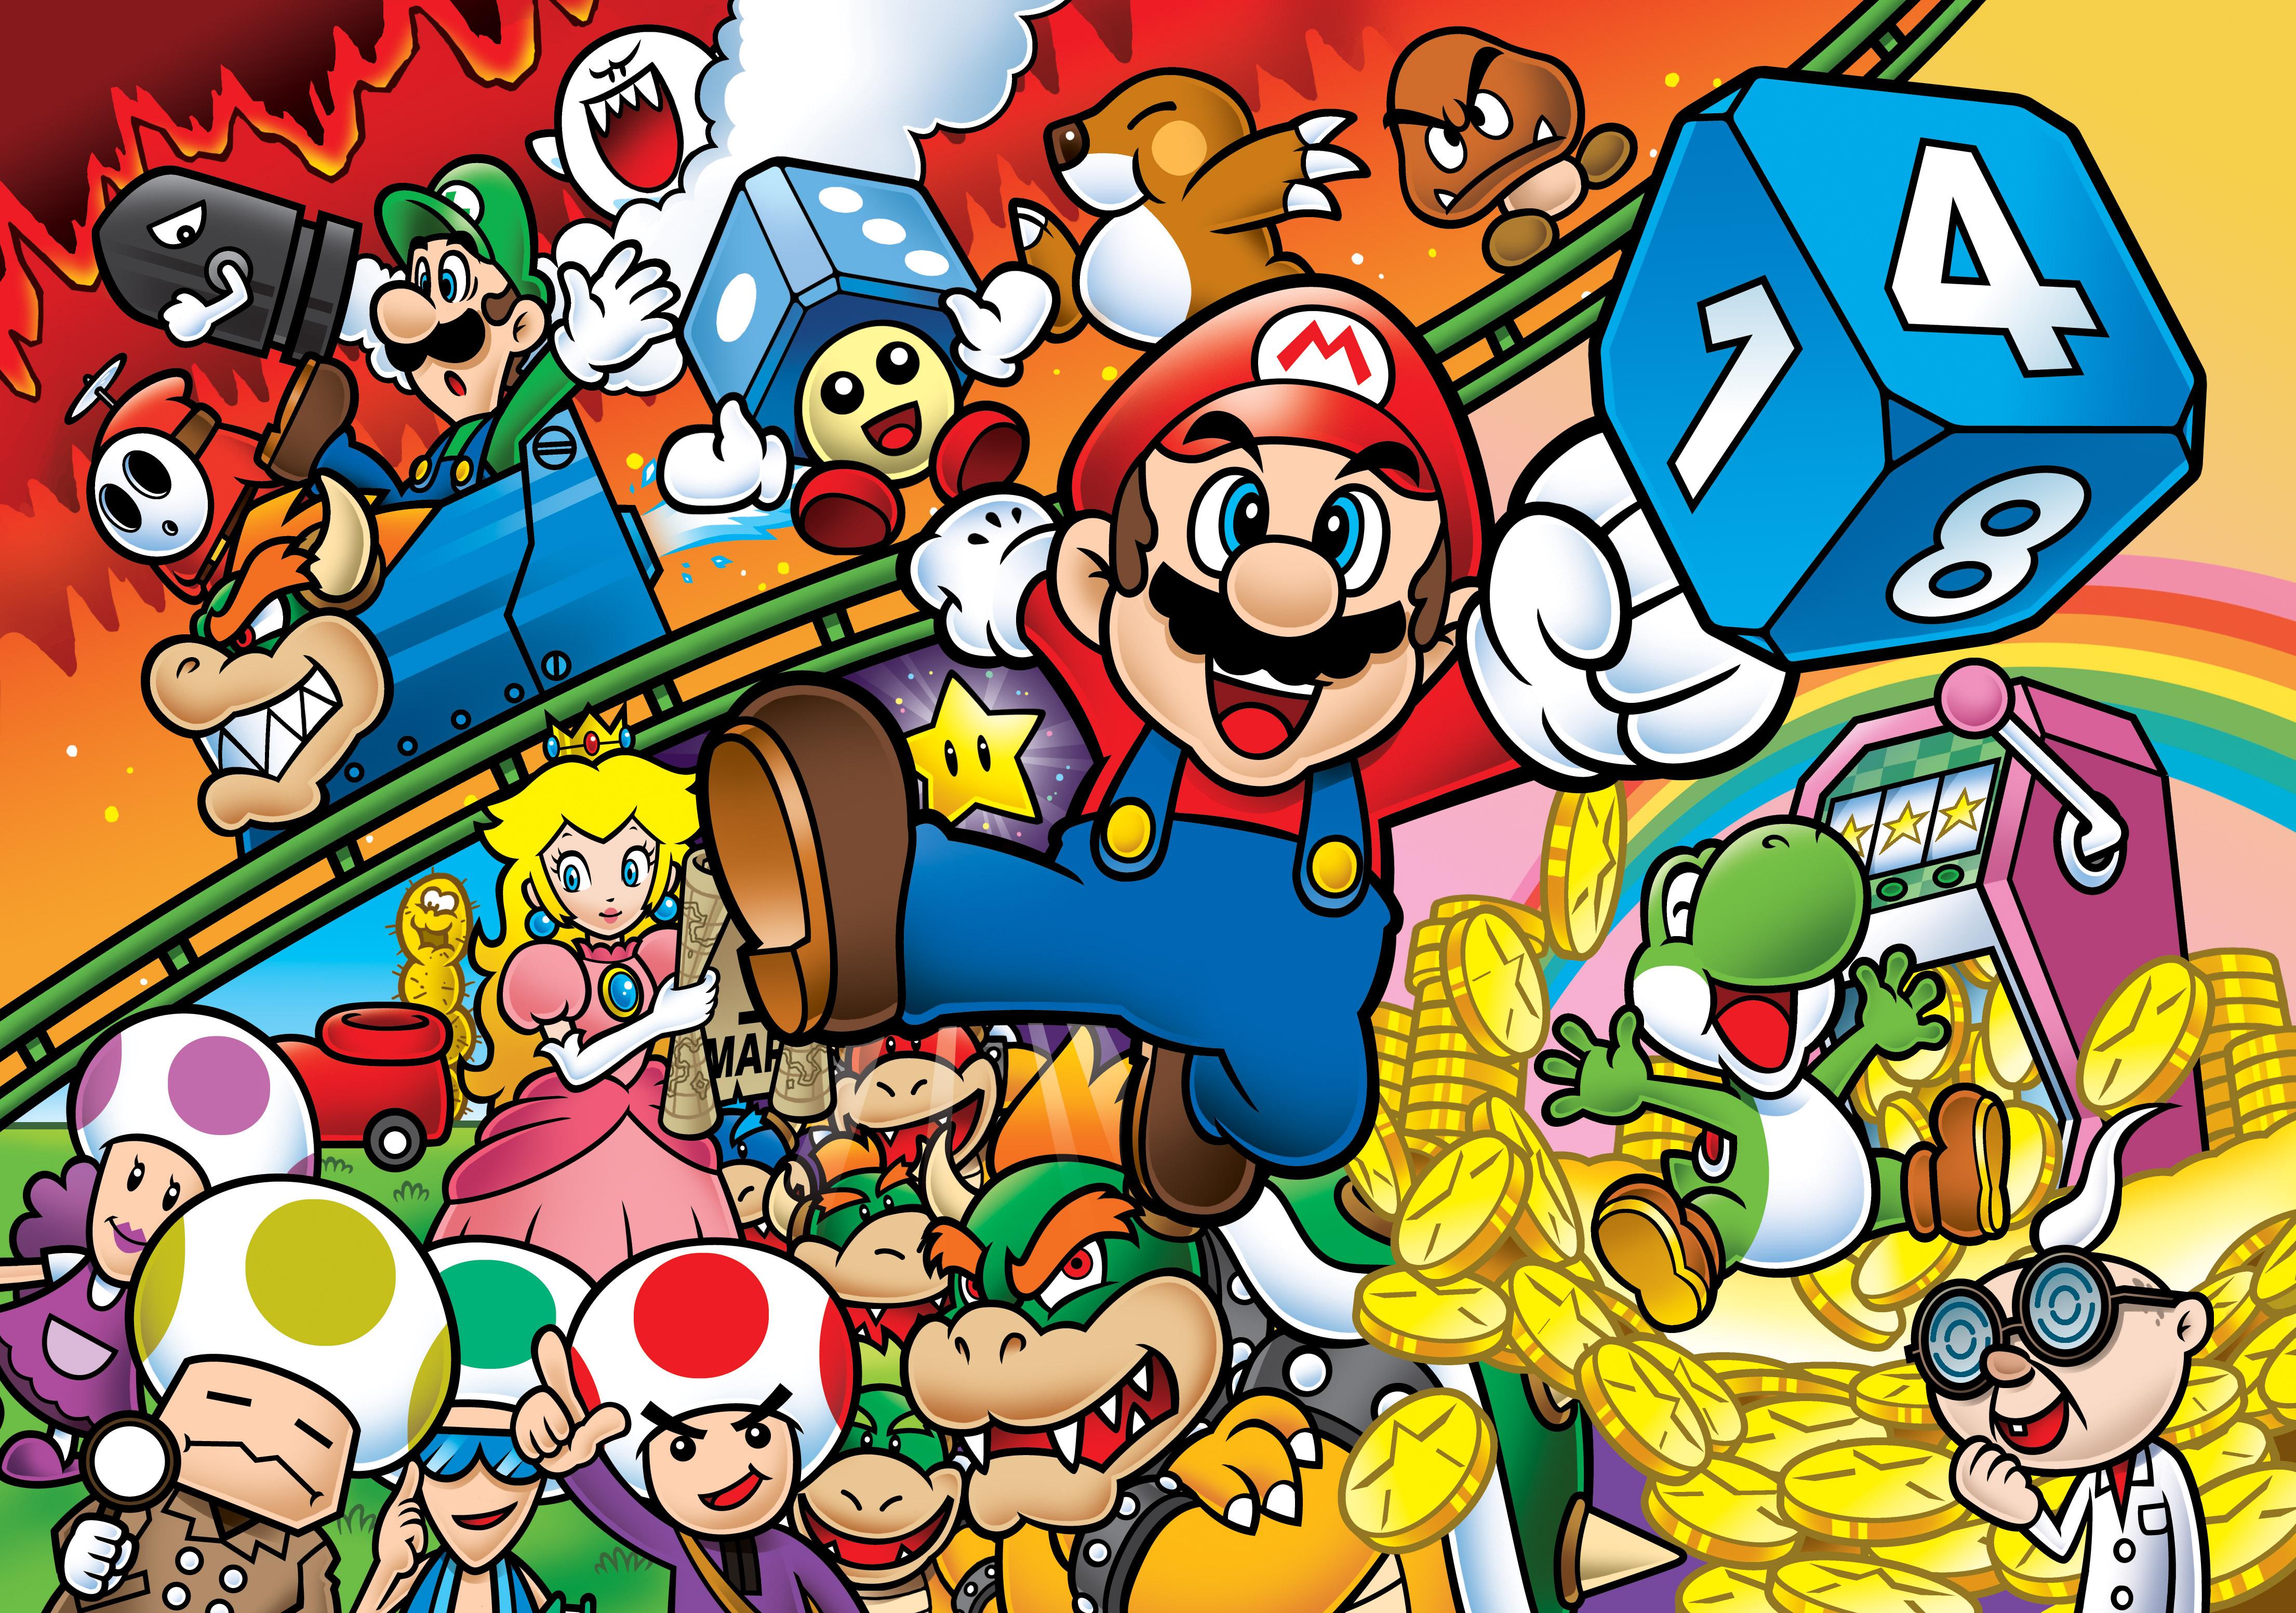 Mario Party Advance (Game Boy Advance) Artwork of Characters and Scenes